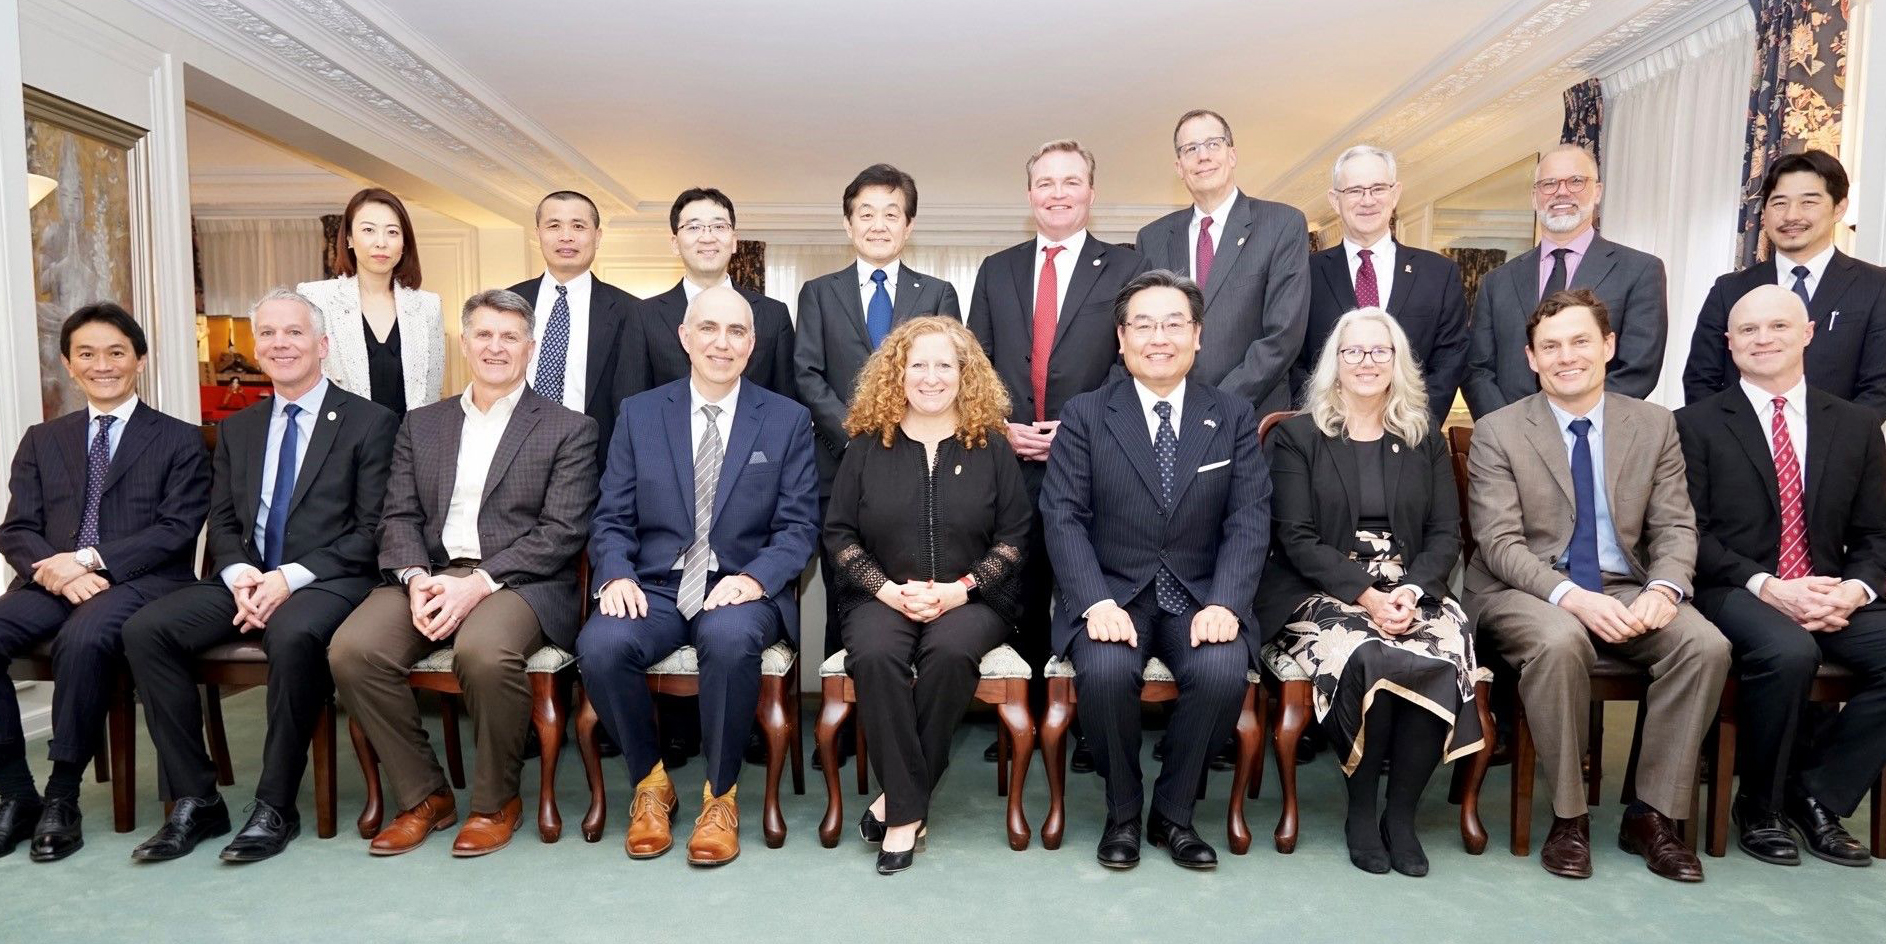 Asst. Vice Chancellor for Industry Engagement Chris Kozina joined Chancellor Jennifer Mnookin for dinner and conversation hosted by Consul-General of Japan Hiroshi Tajima.